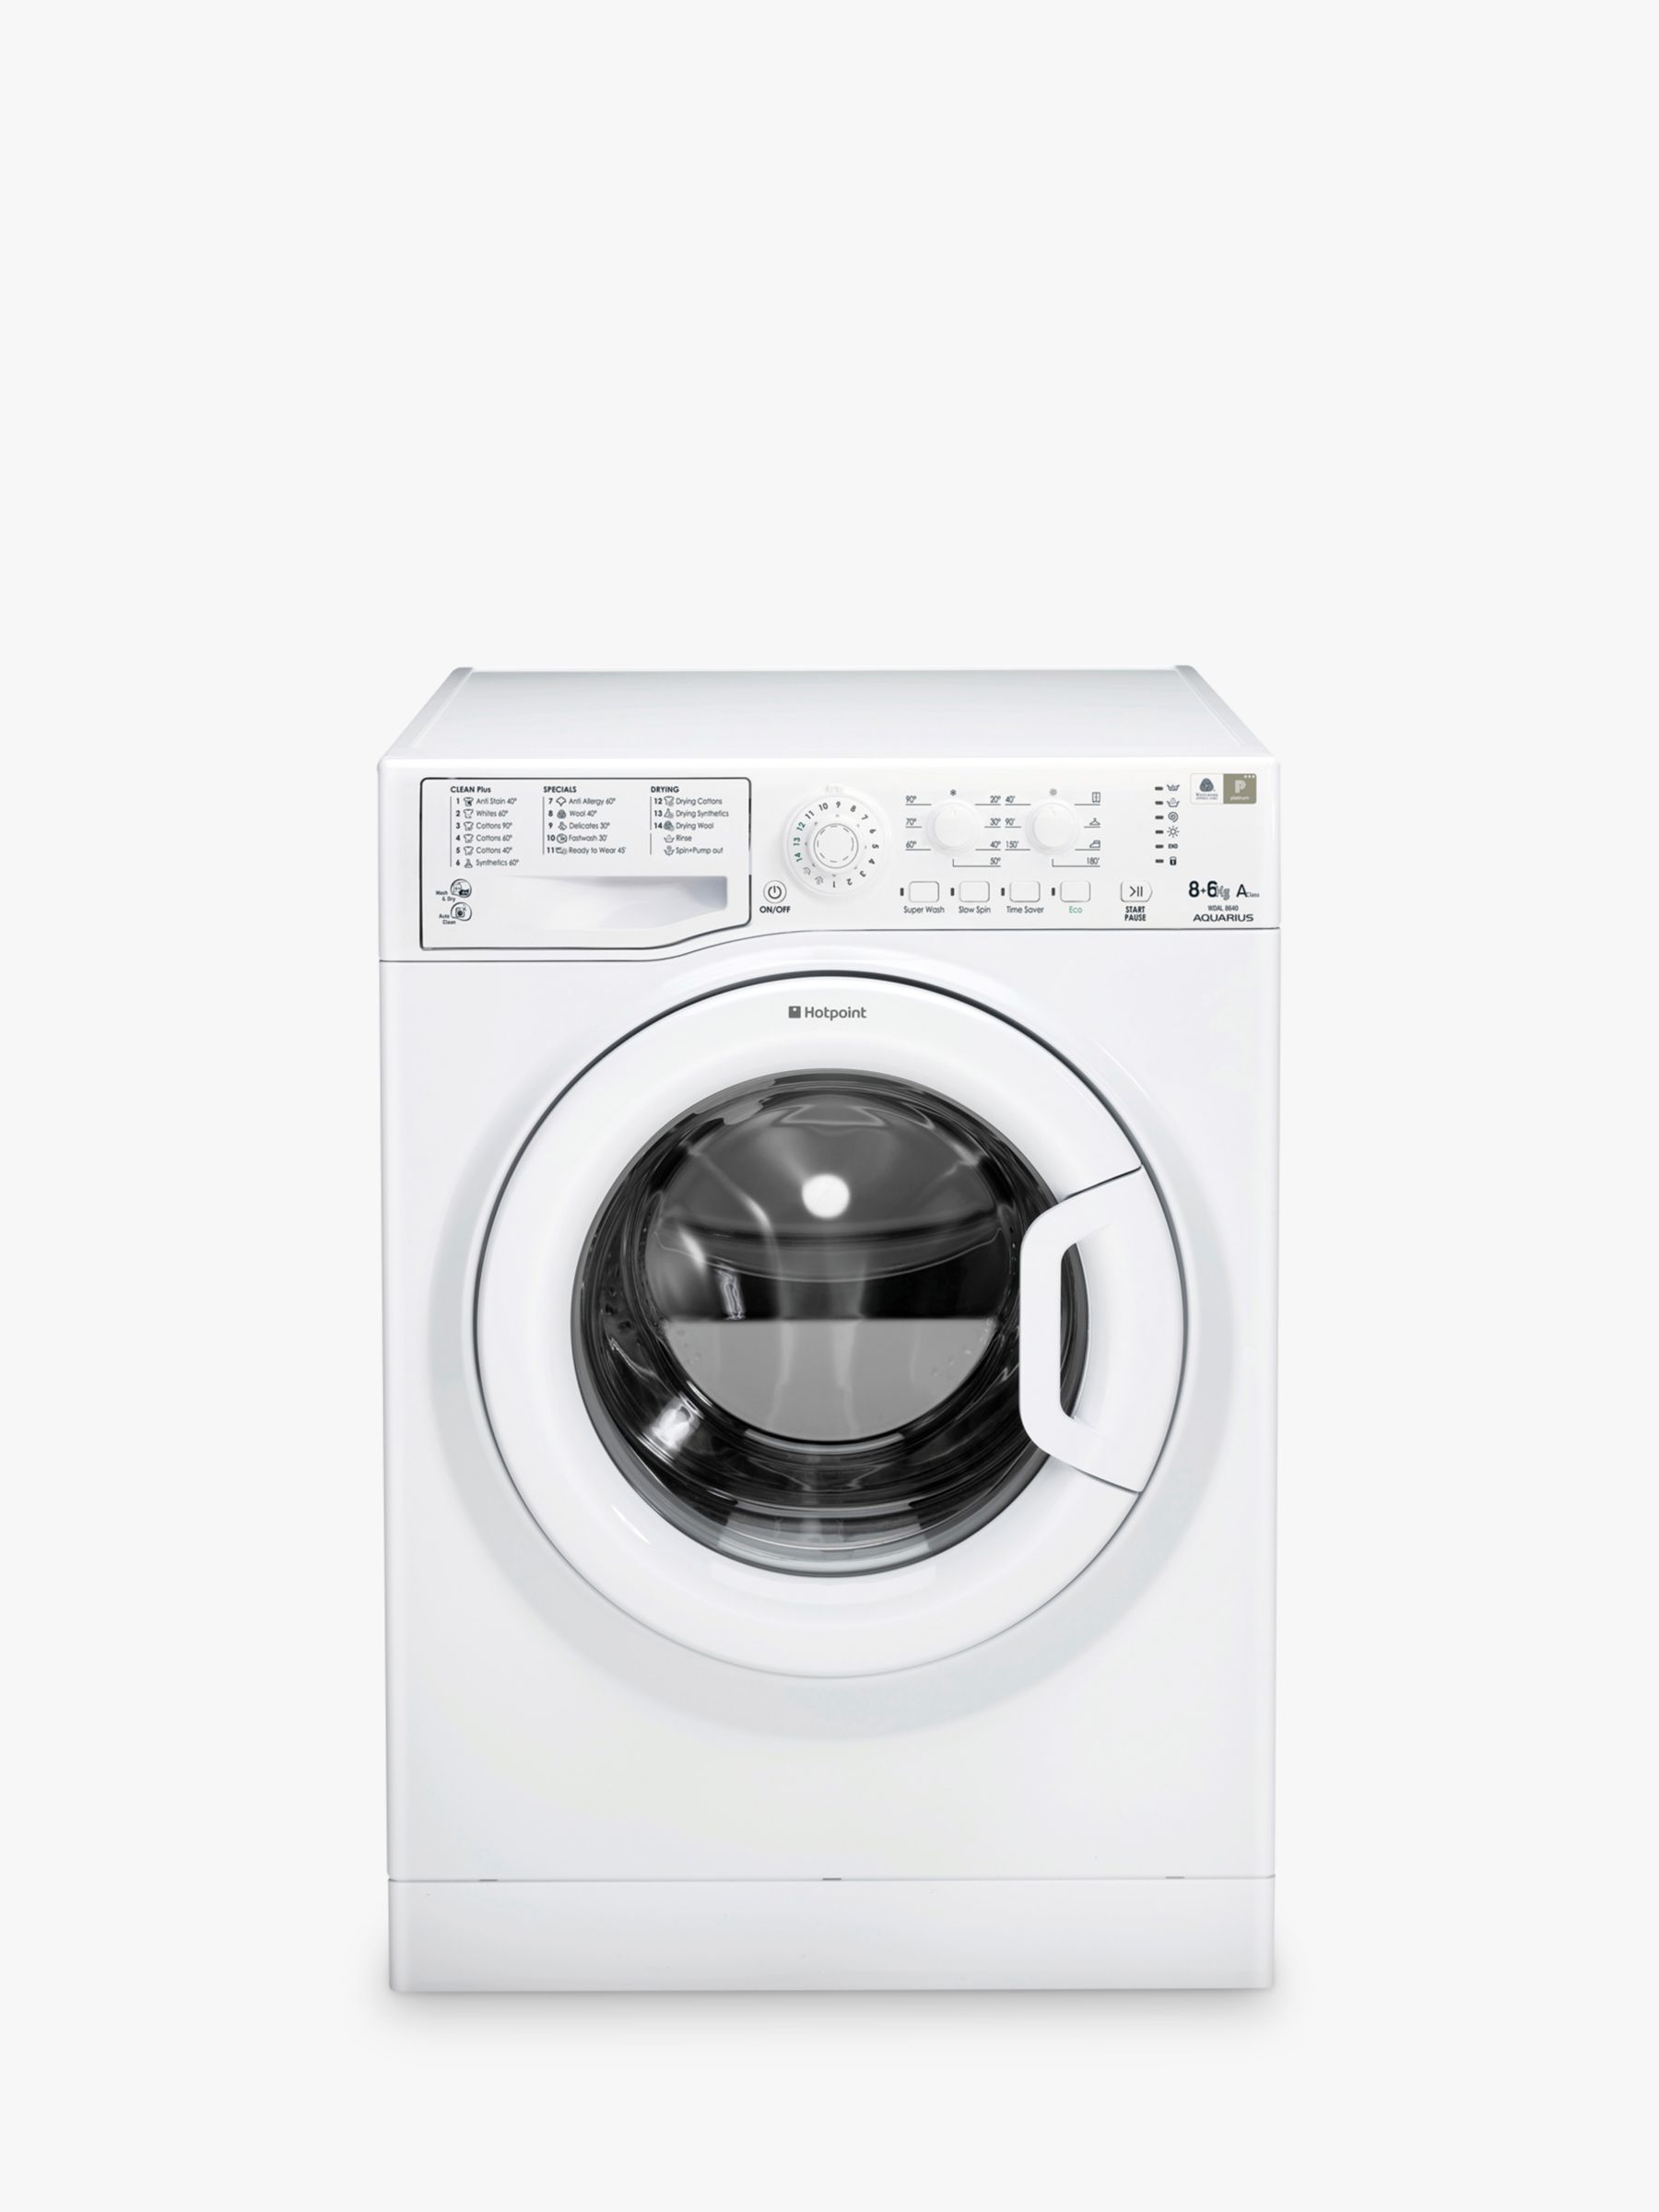 Hotpoint WDAL8640P Washer Dryer, 8kg Wash/6kg Dry Load, A Energy Rating, 1400rpm Spin in White